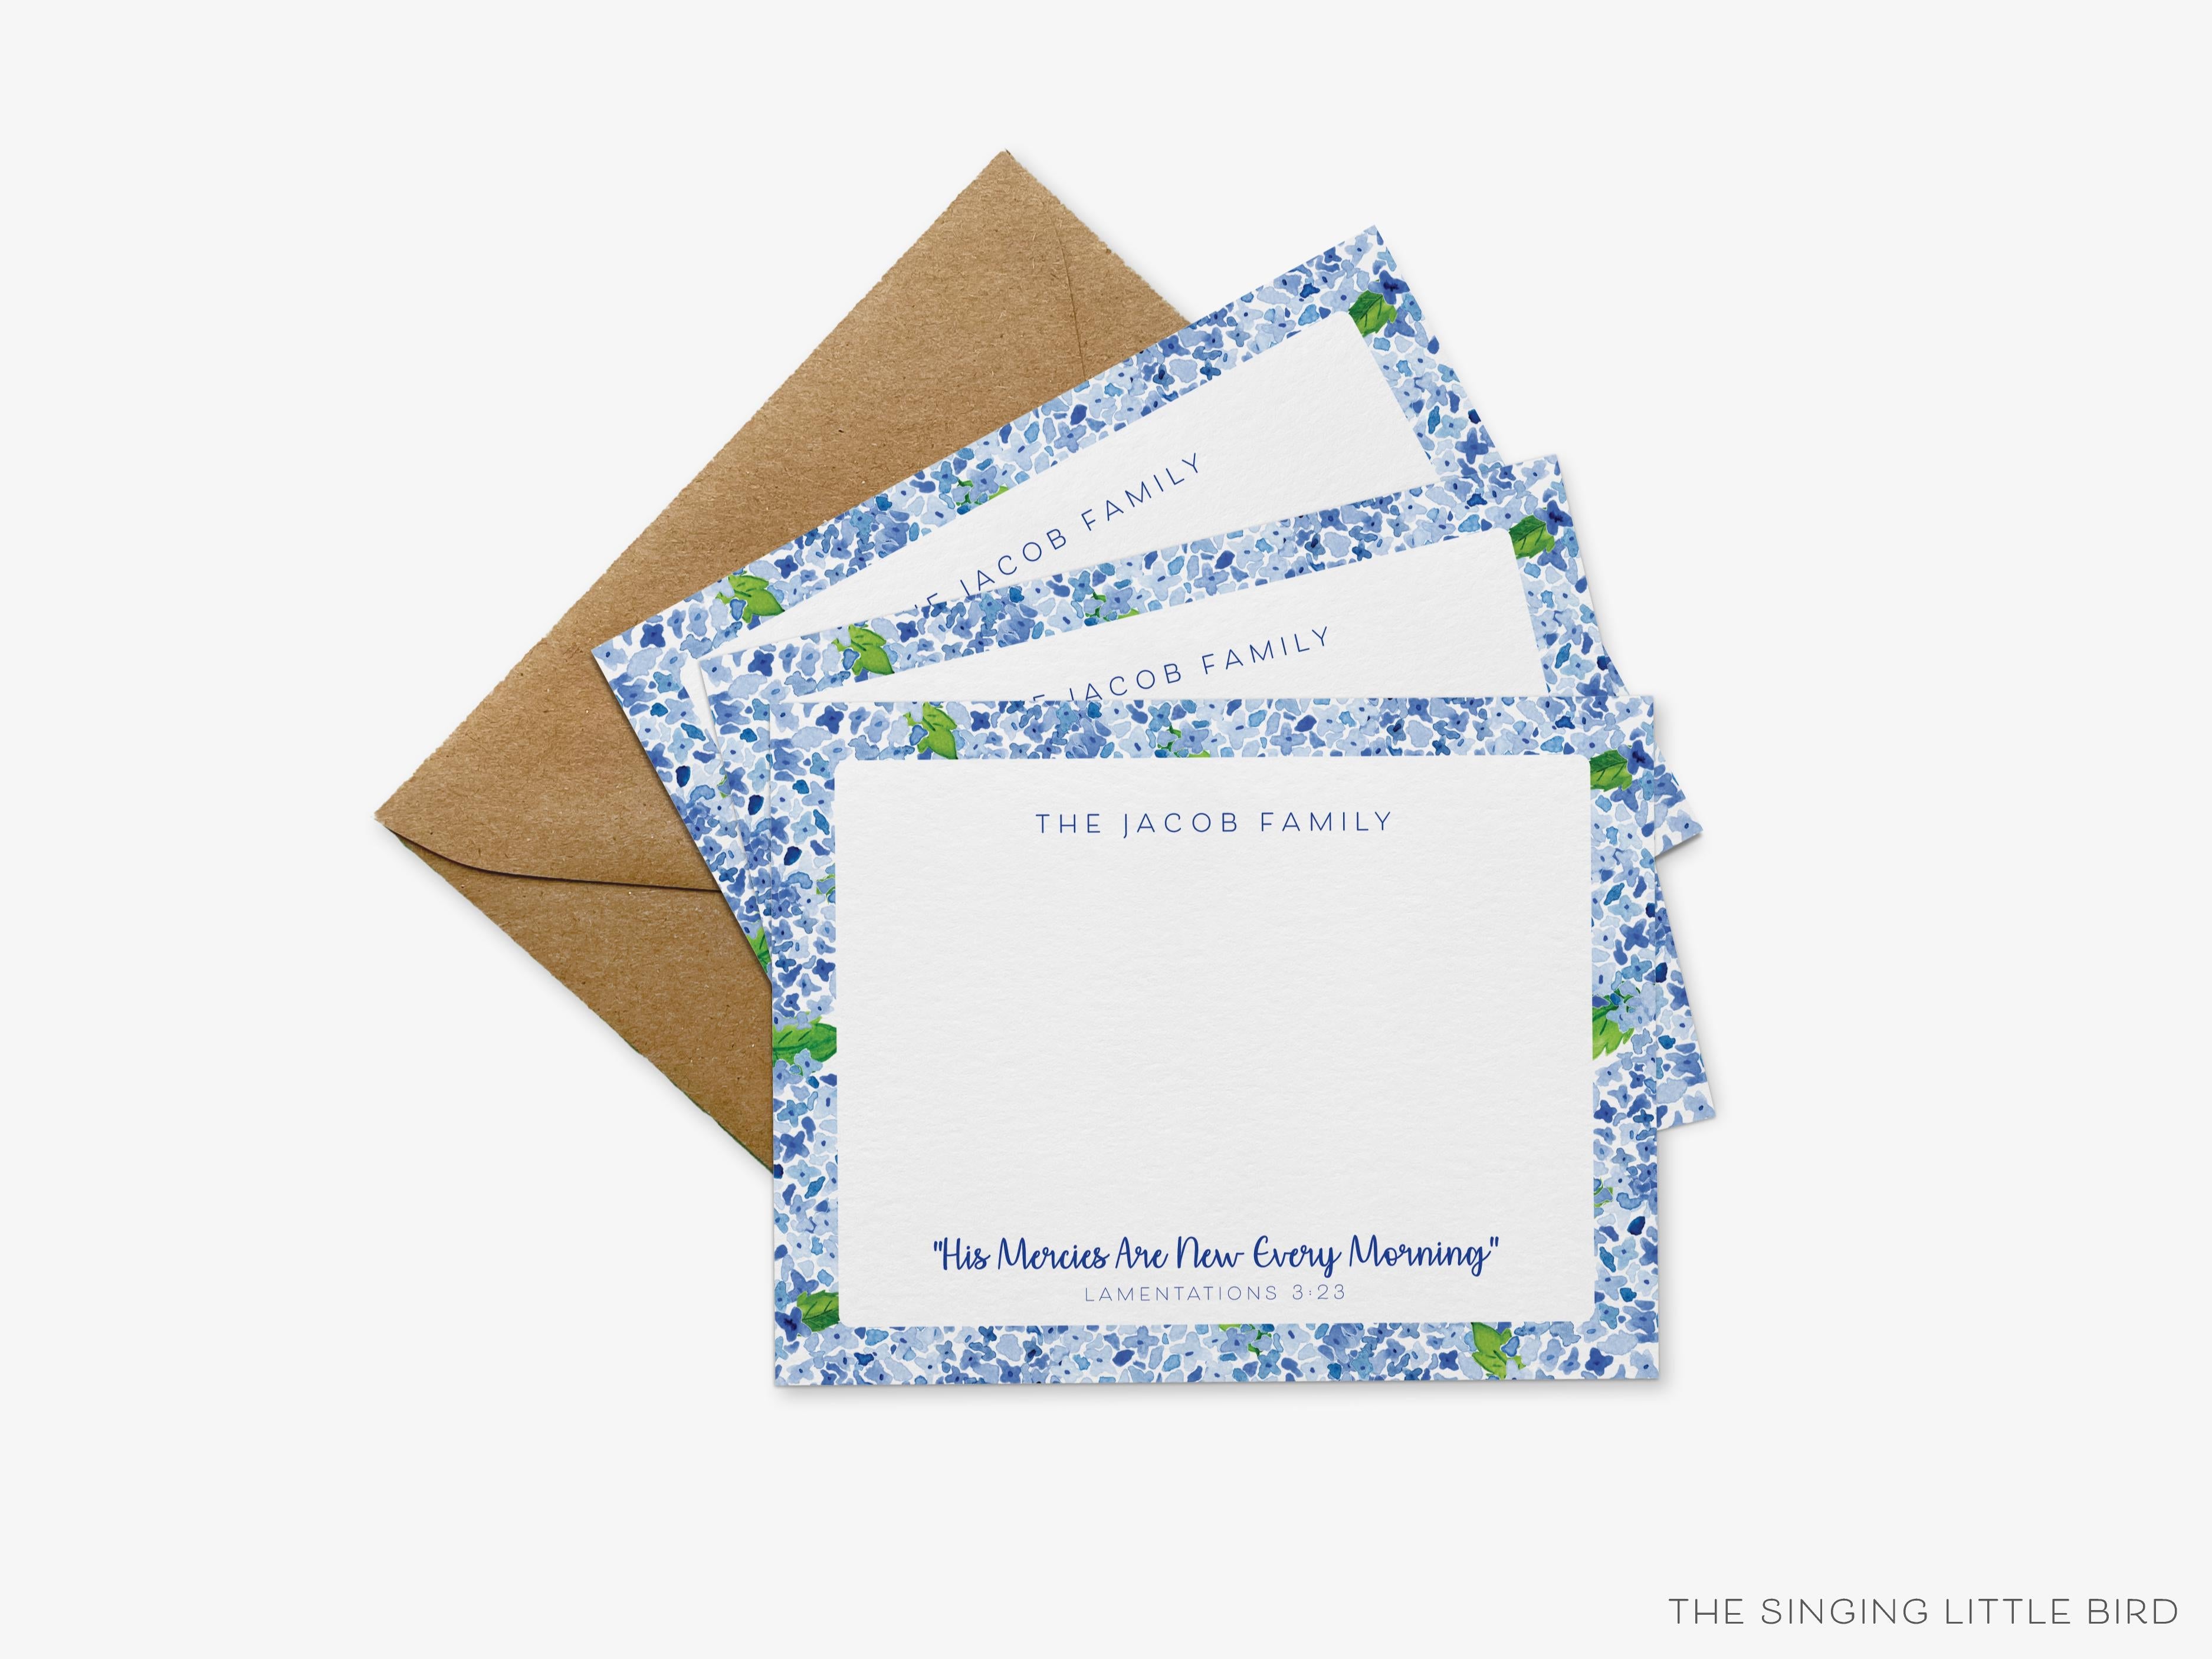 Personalized His Mercies Are New Bible Verse Flat Notes-These personalized flat notecards are 4.25x5.5 and feature our hand-painted watercolor hydrangeas, printed in the USA on 120lb textured stock. They come with your choice of envelopes and make great thank yous and gifts for the Christian lover in your life.-The Singing Little Bird